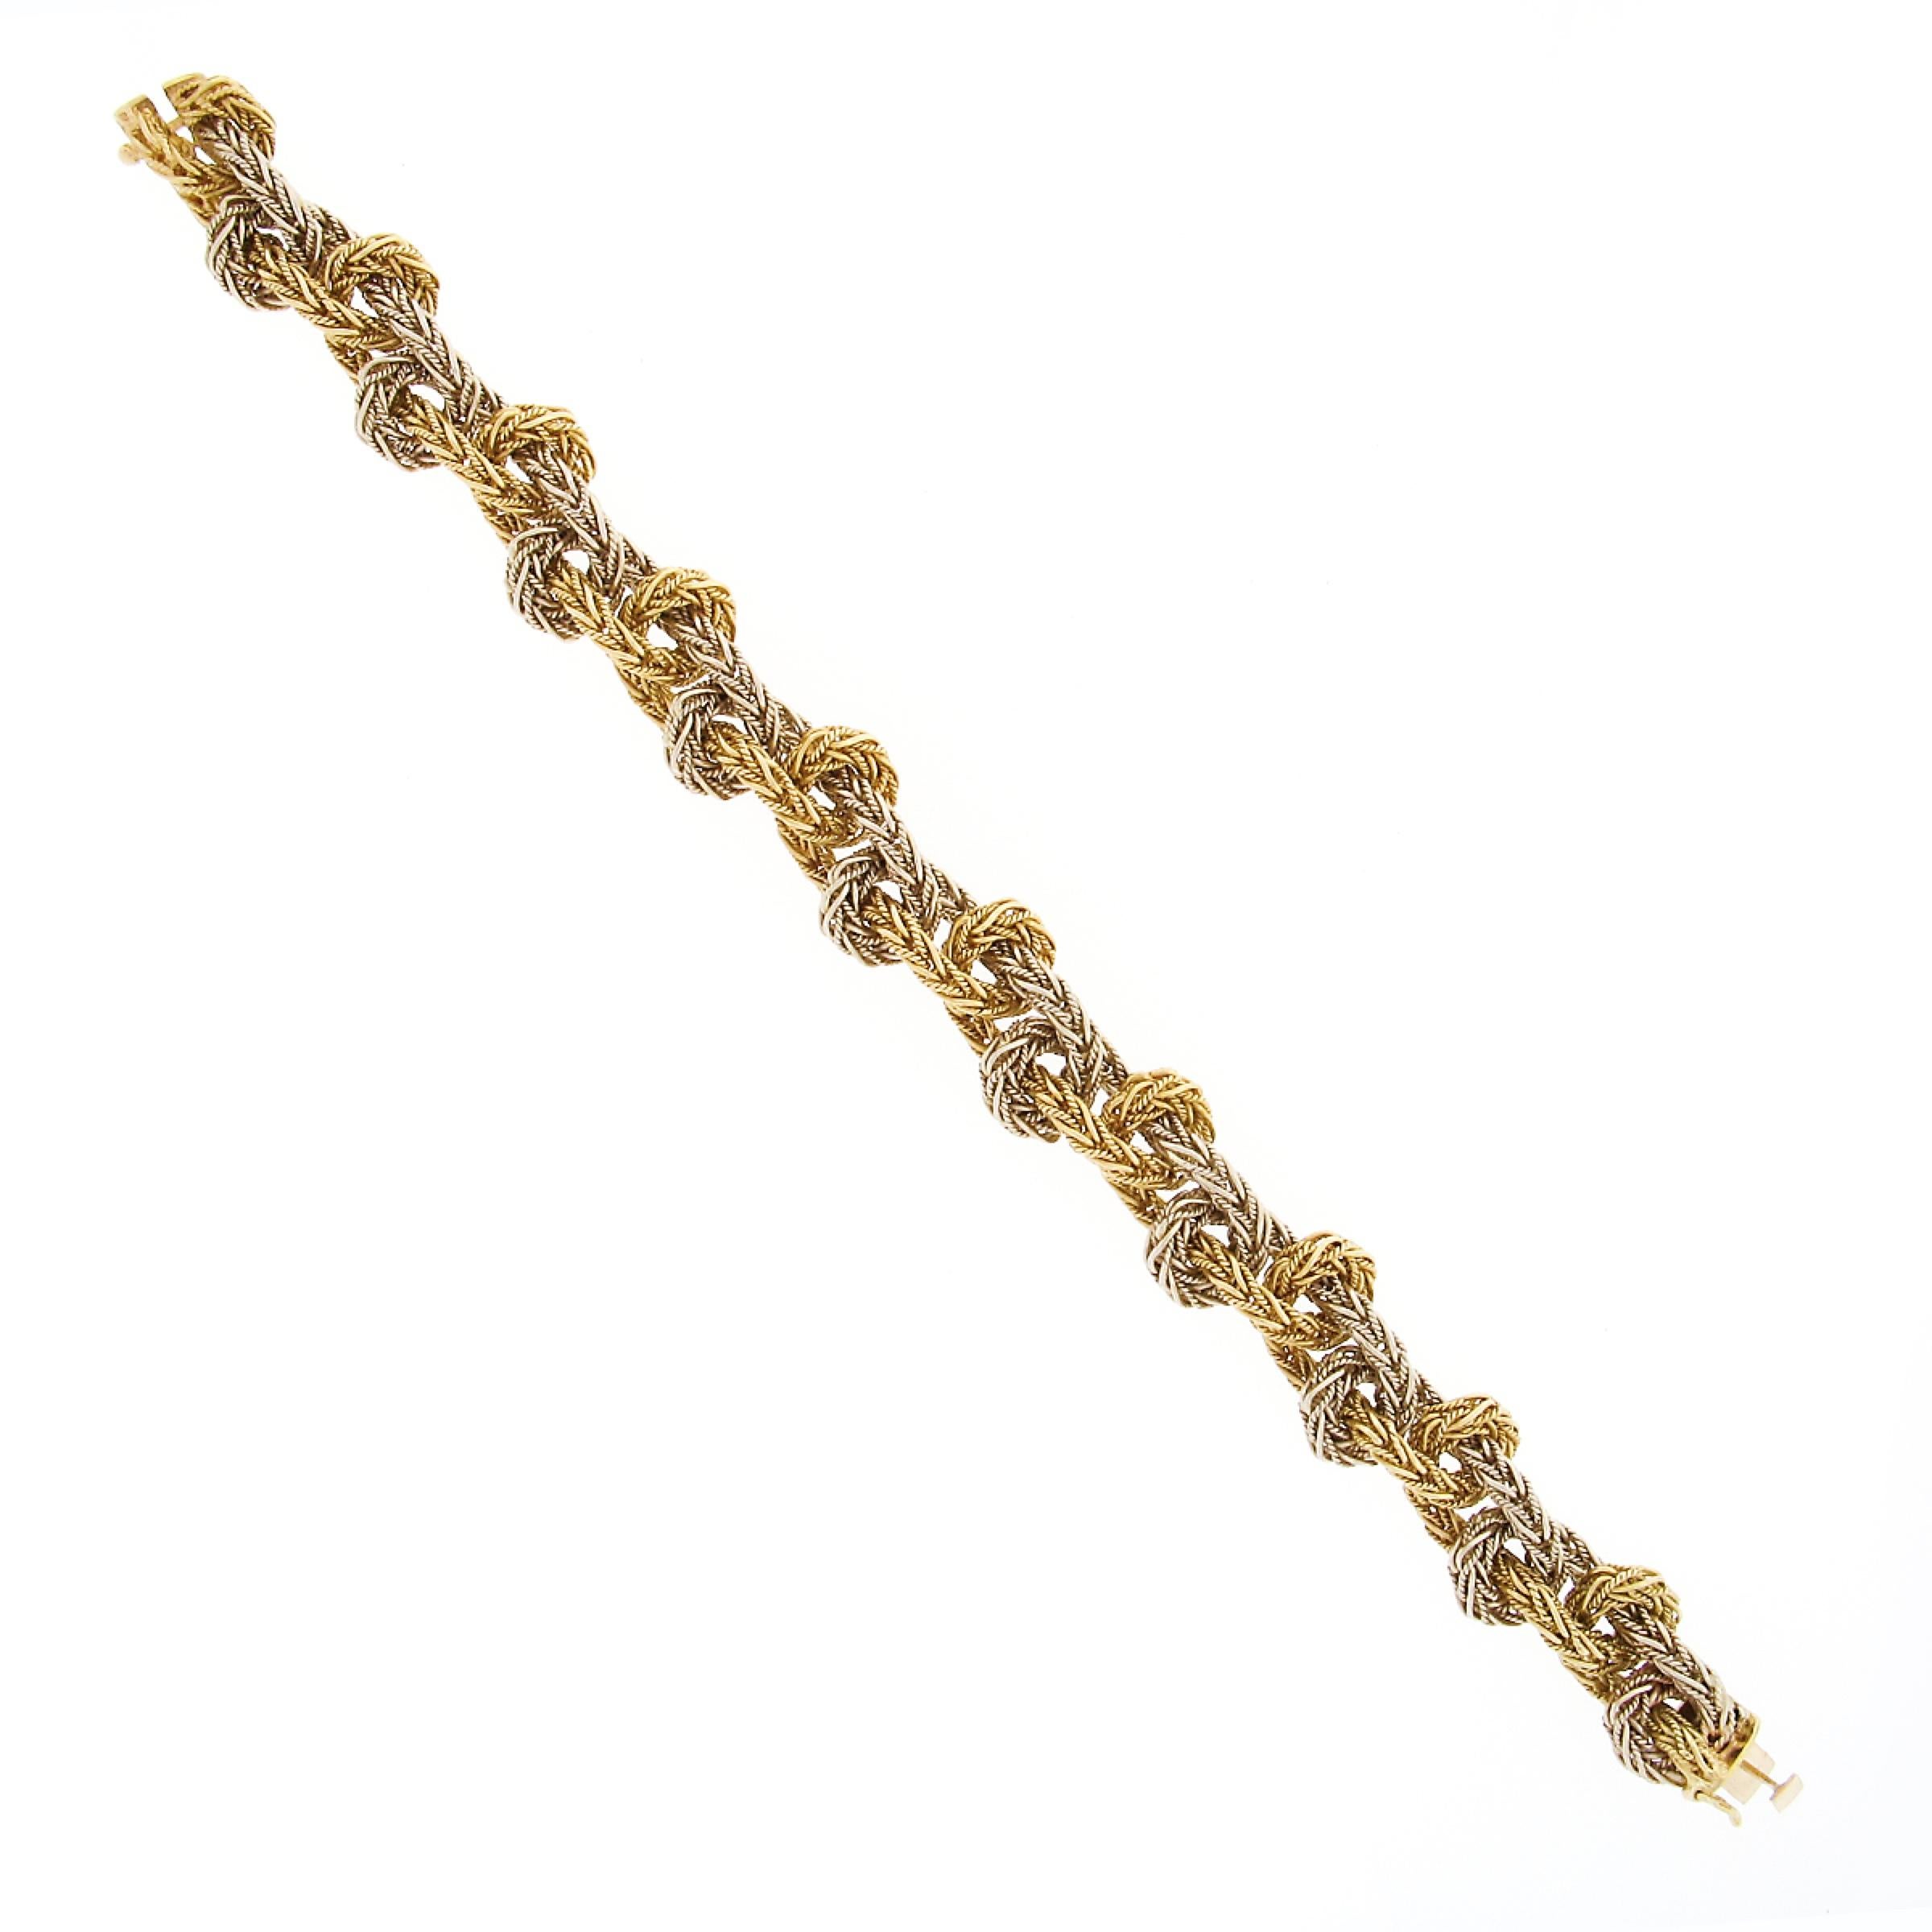 Women's Vintage 18K TT Gold Braided Polished Twisted Wire Wheat Link Into Knot Bracelet For Sale